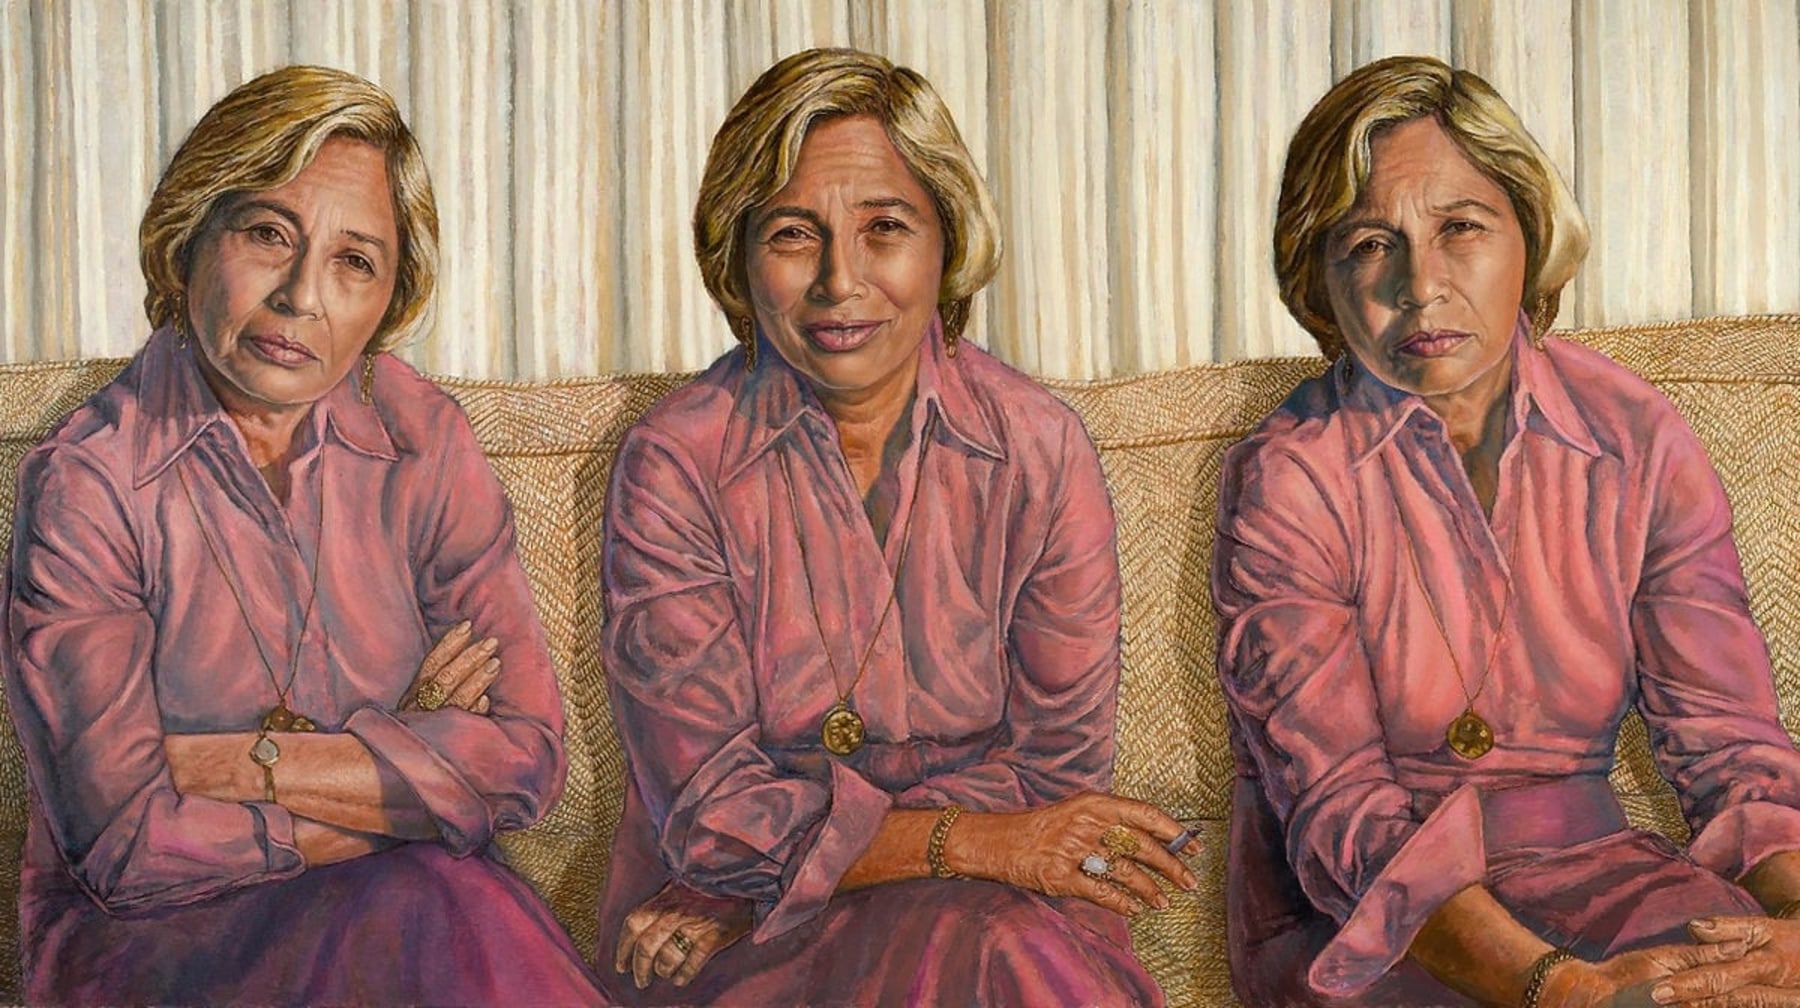 Portrait of a blond woman in a pink outfit sitting on a couch, appearing three times wearing different expressions